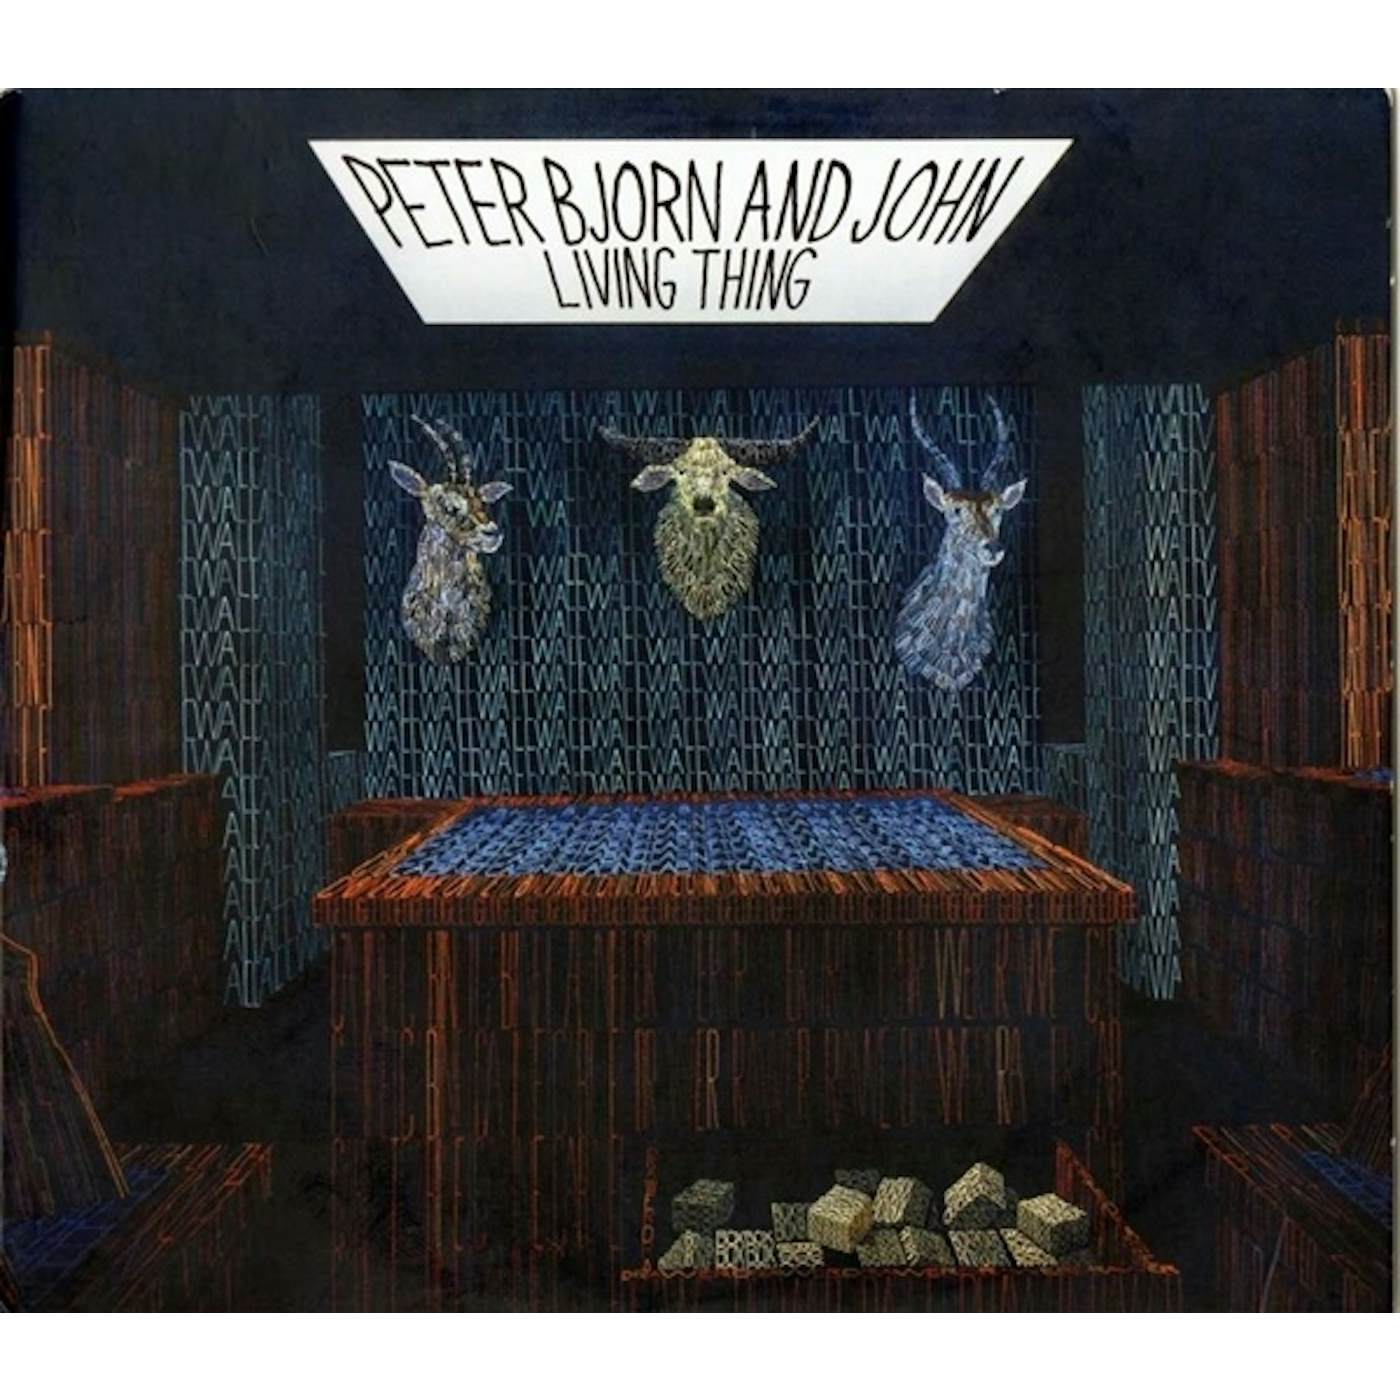 Peter Bjorn and John LIVING THING Vinyl Record - Sweden Release